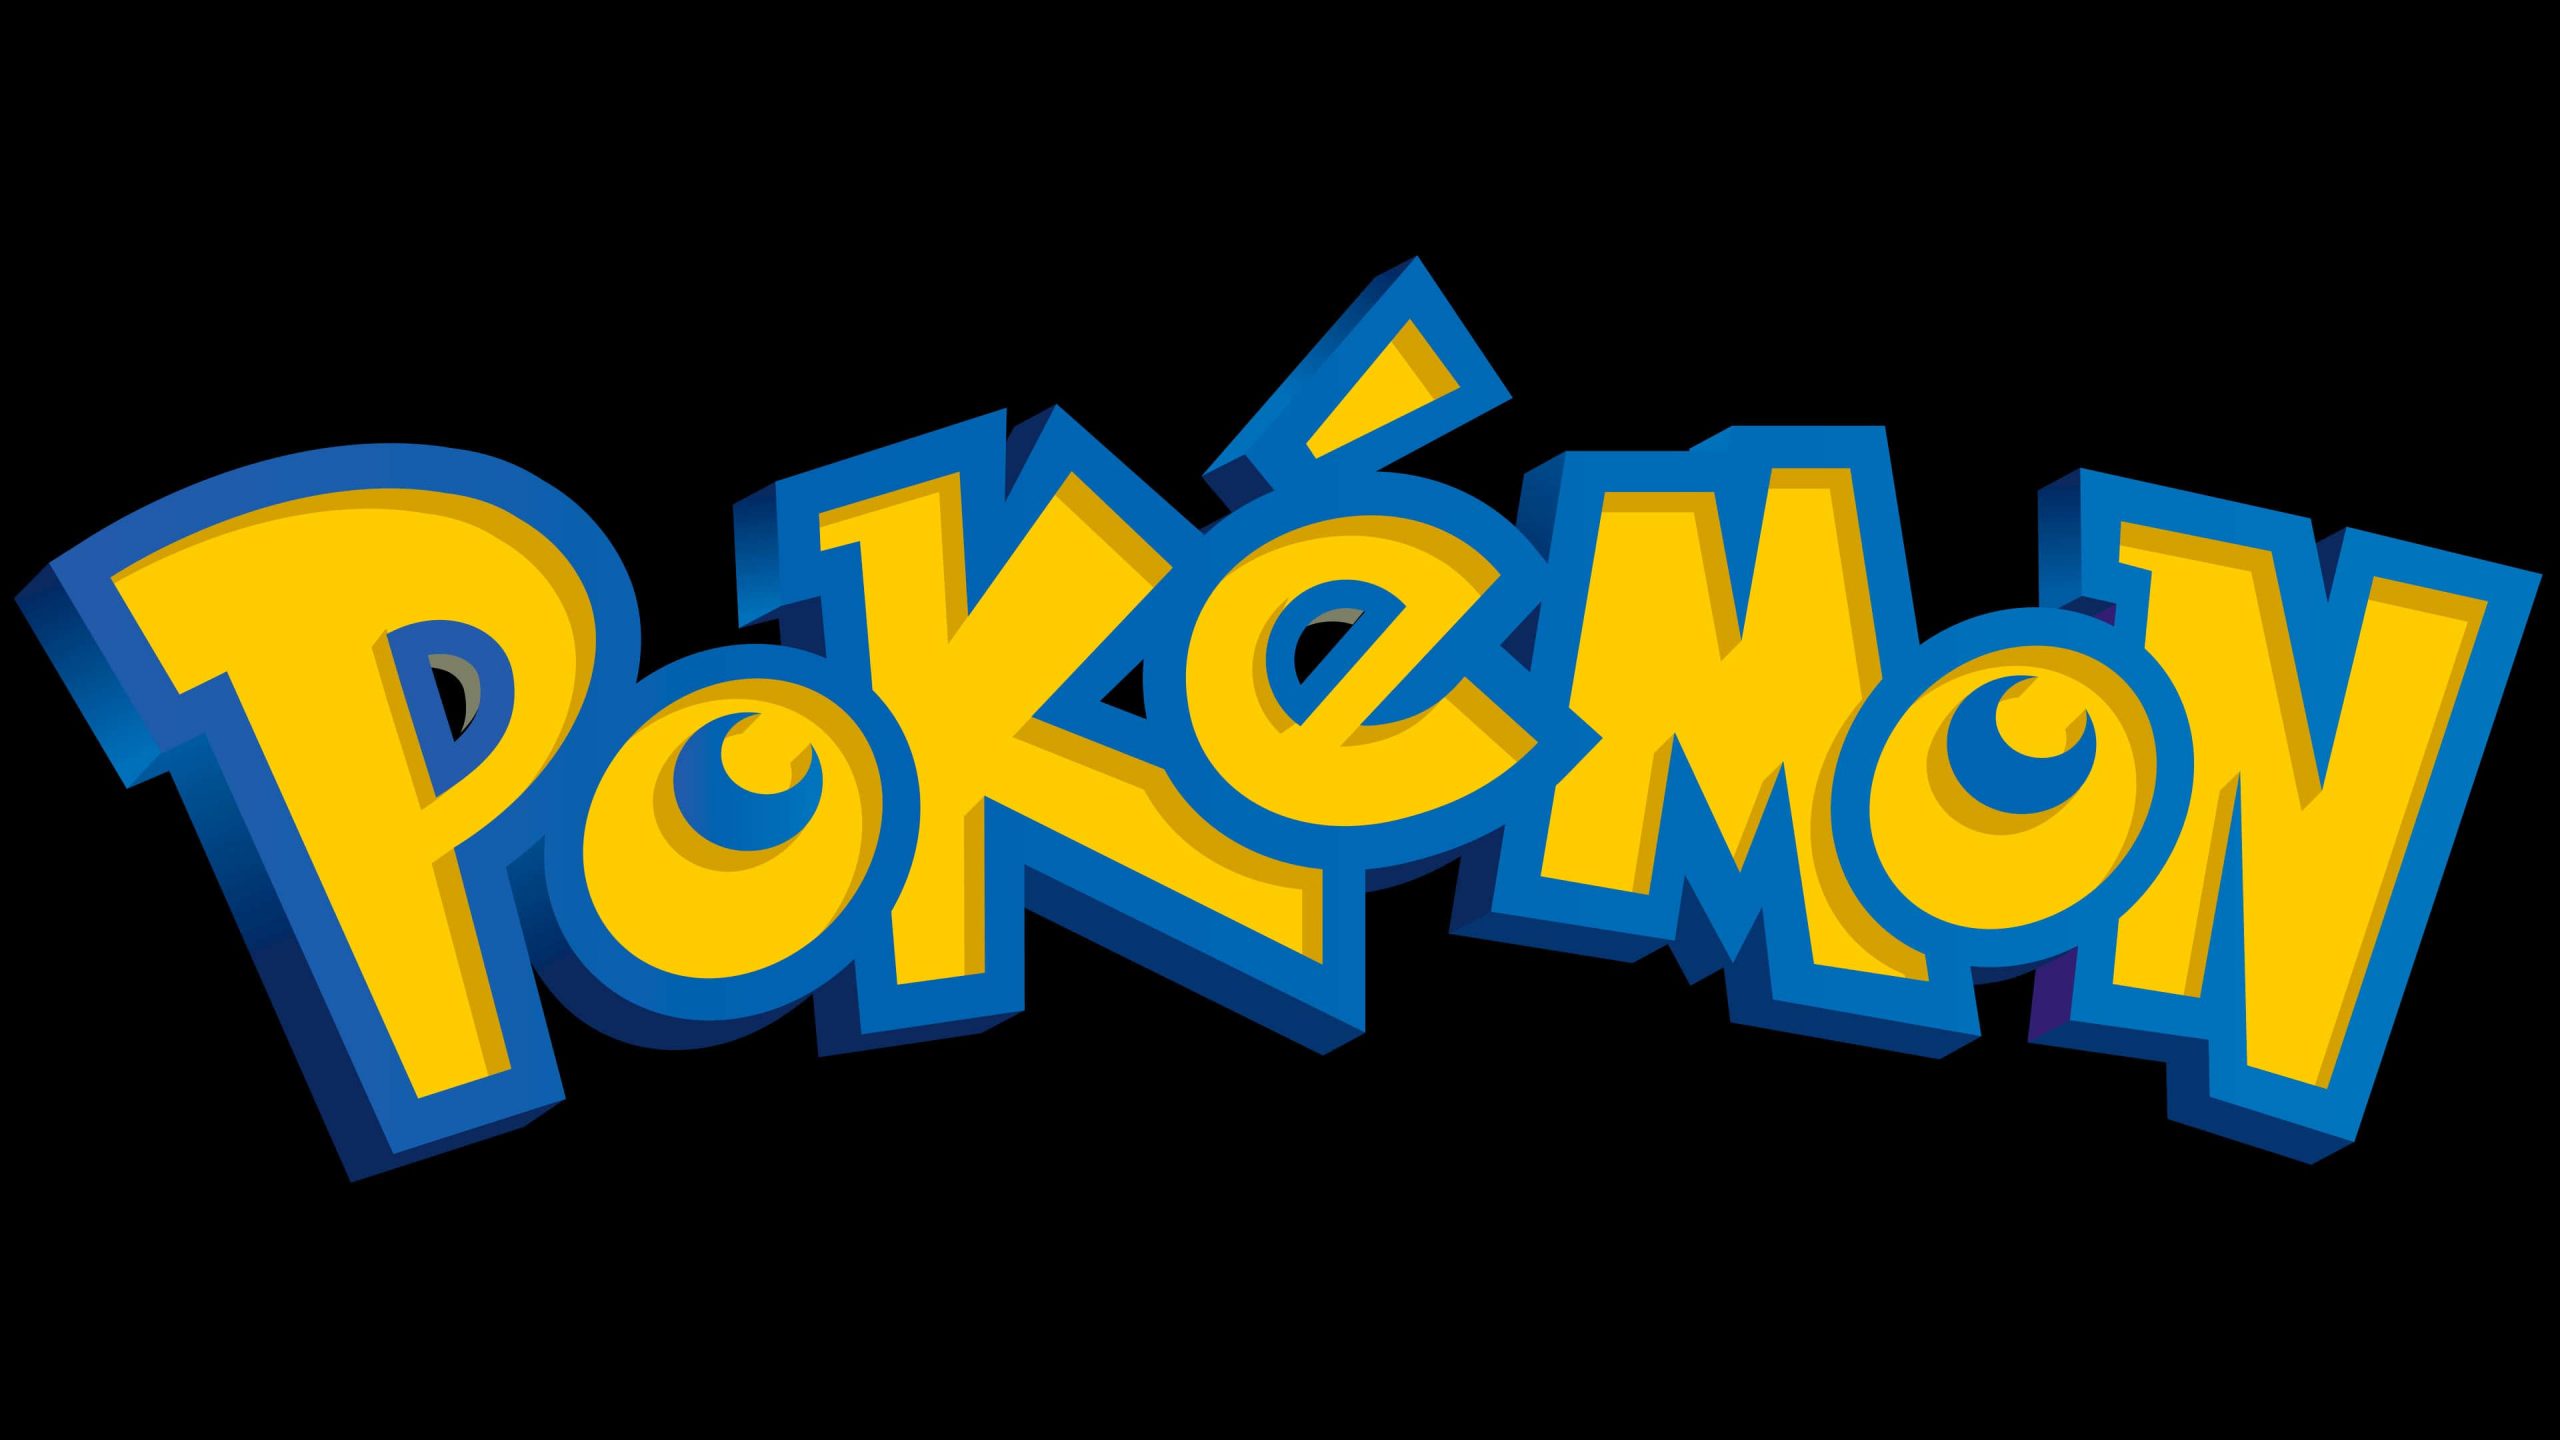 Pokemon Yellow Remake was confirmed